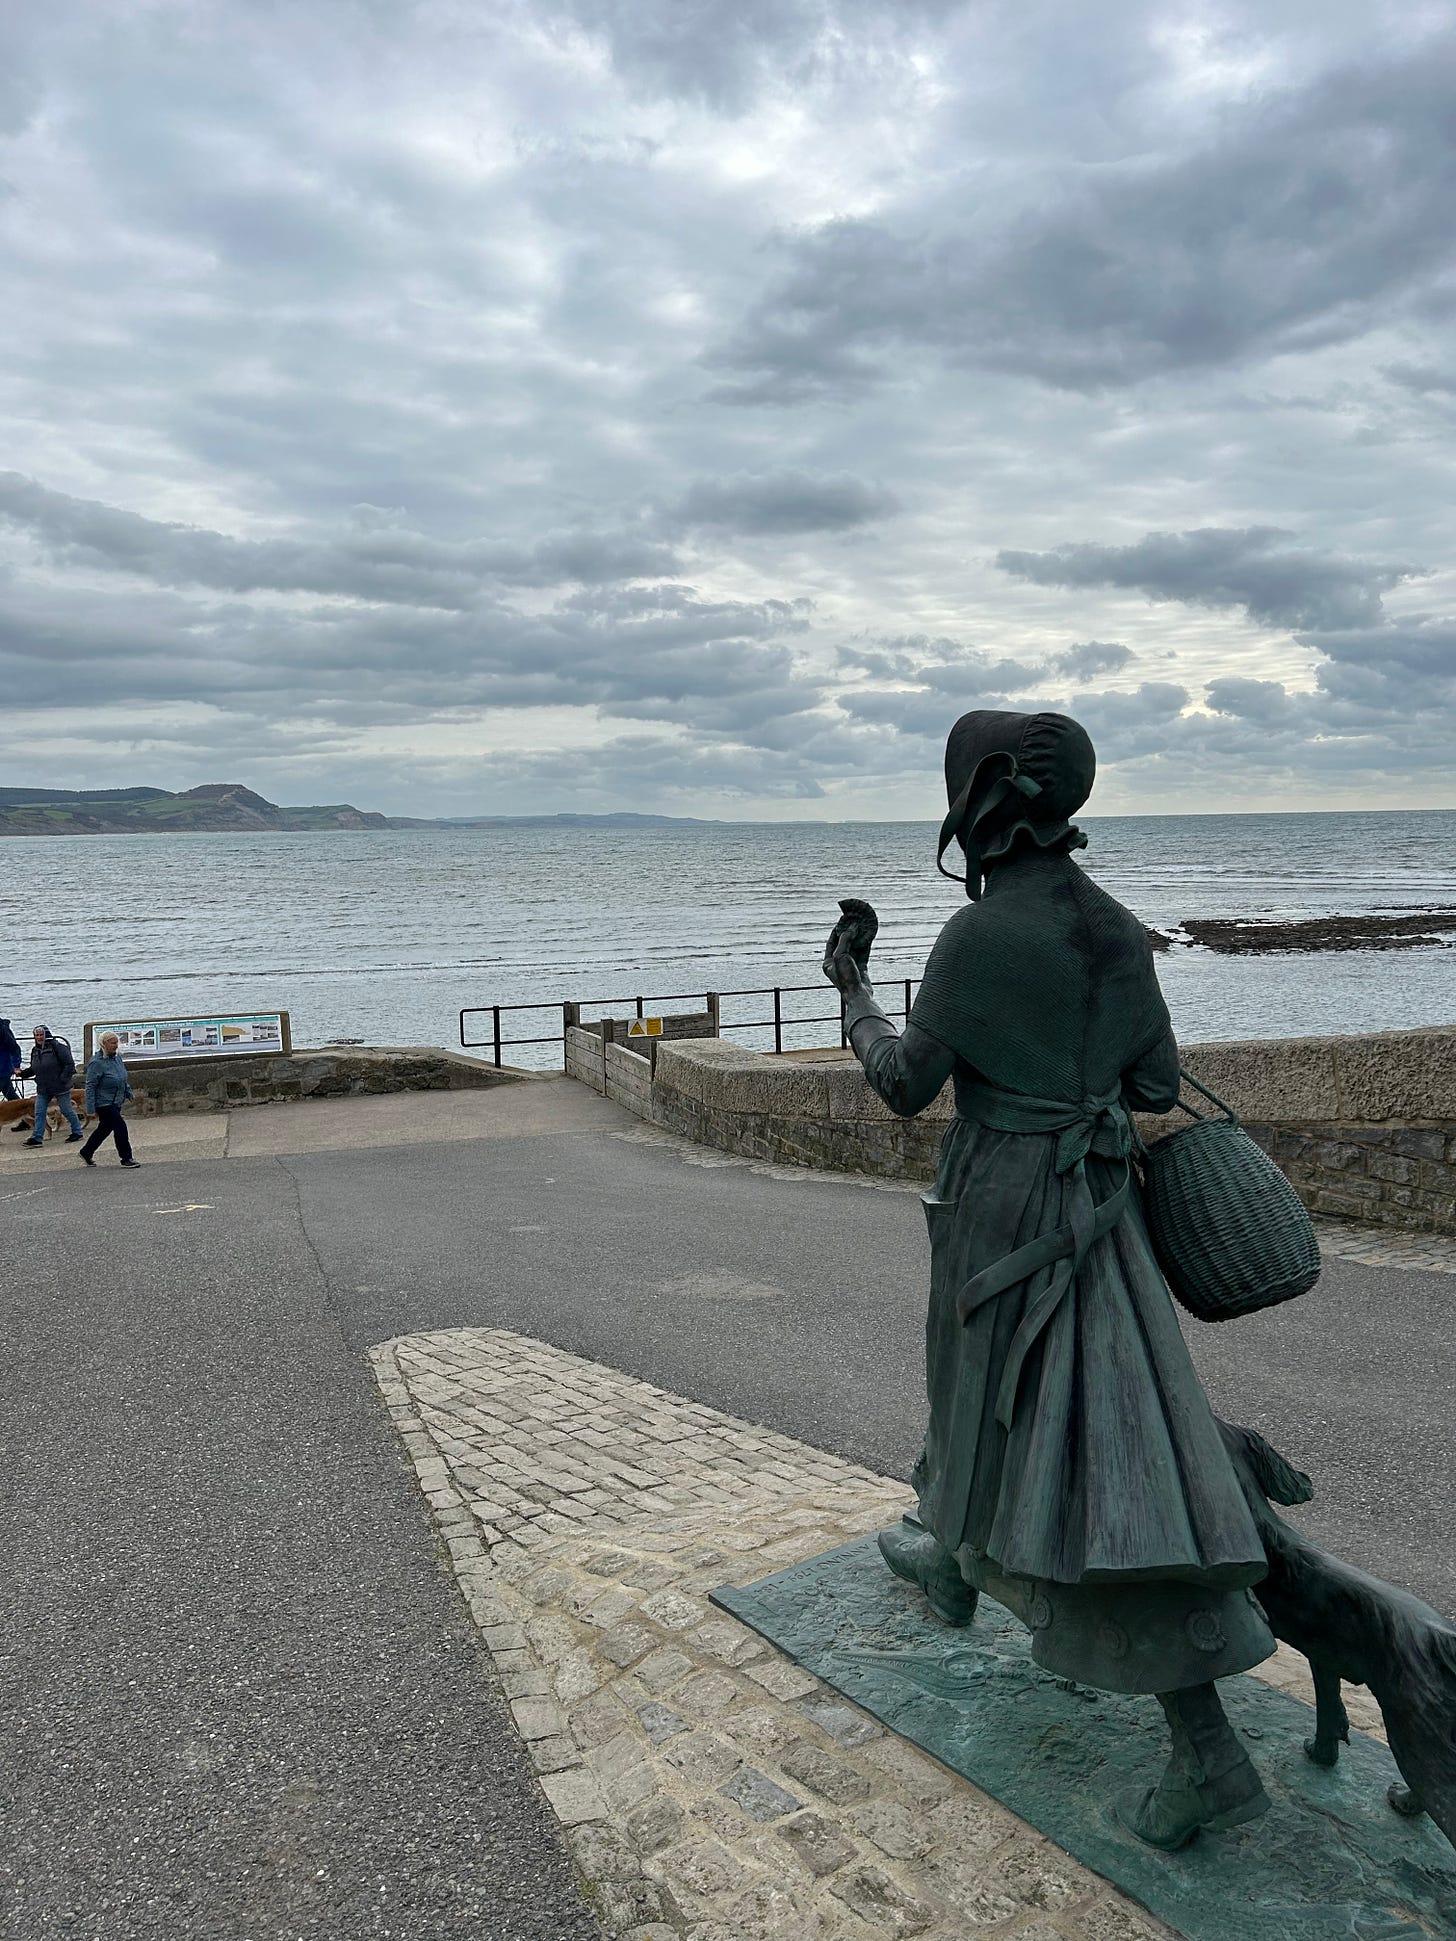 Mary Anning looks east across the bay at some of the fossil-rich coastline. The grey sky gives a dramatic look to the photo. Image: Roland’s Travels